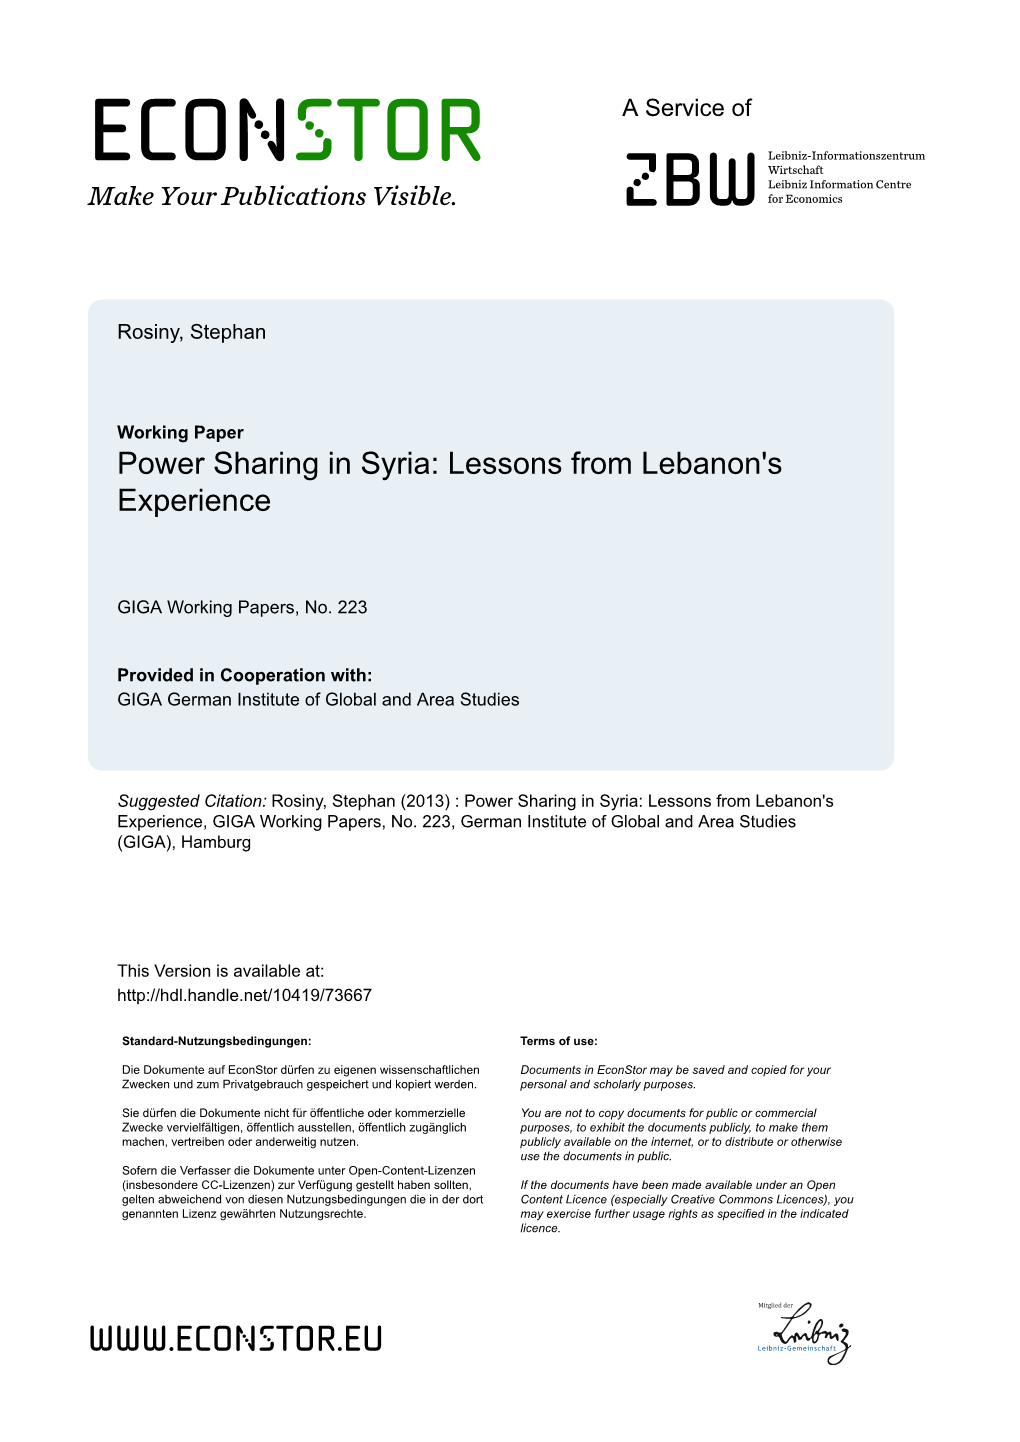 Power Sharing in Syria: Lessons from Lebanon's Experience